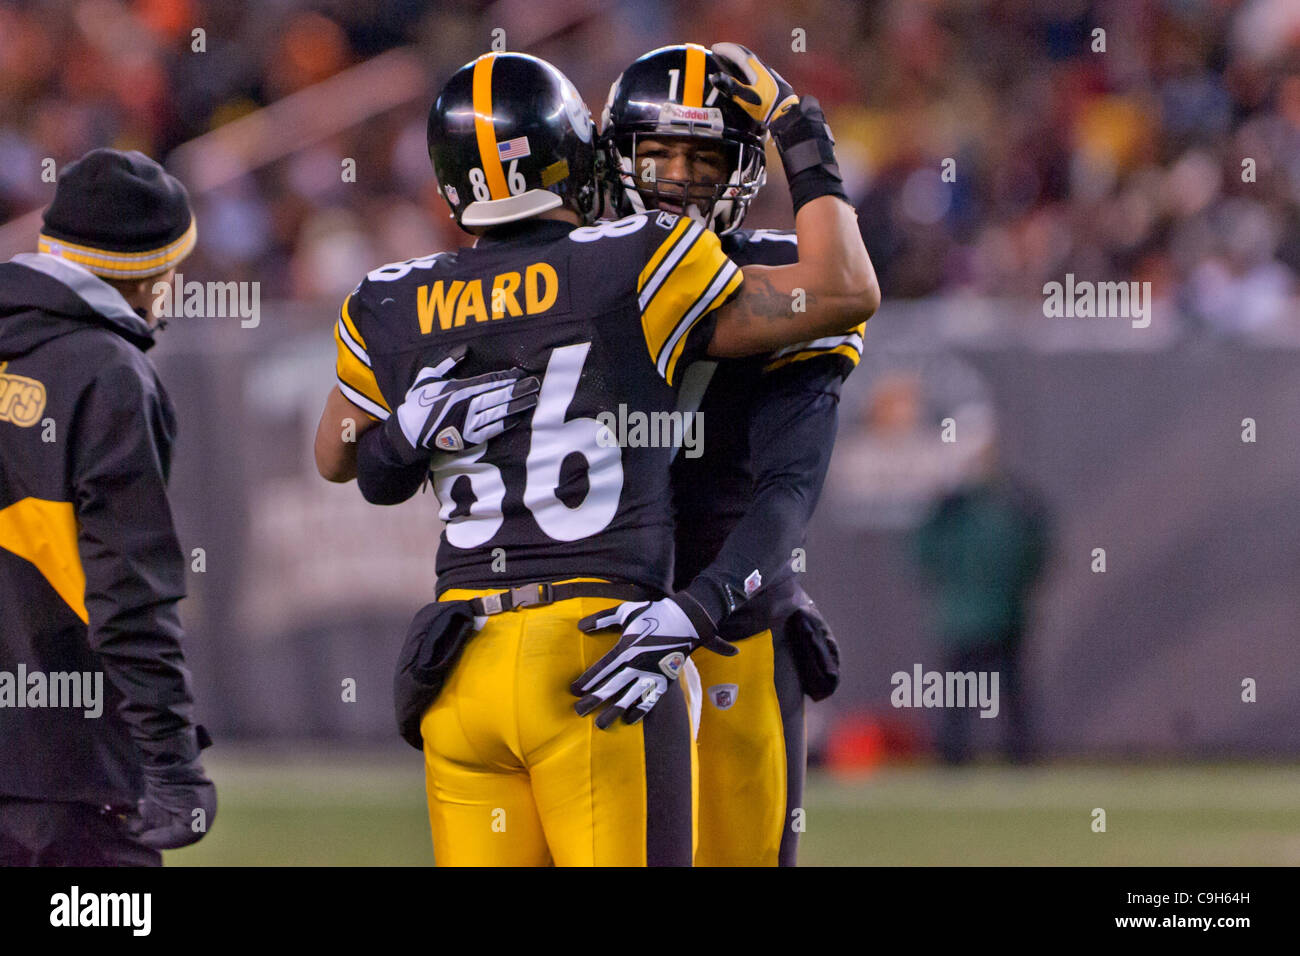 Jan. 1, 2012 - Cleveland, Ohio, U.S - Pittsburgh wide receivers Hines Ward (86) and Mike Wallace (17) embrace in celebration of Ward's 1,000th pass reception during the fourth quarter against Cleveland.  The Pittsburgh Steelers defeated the Cleveland Browns 13-9 in the game played at Cleveland Brown Stock Photo